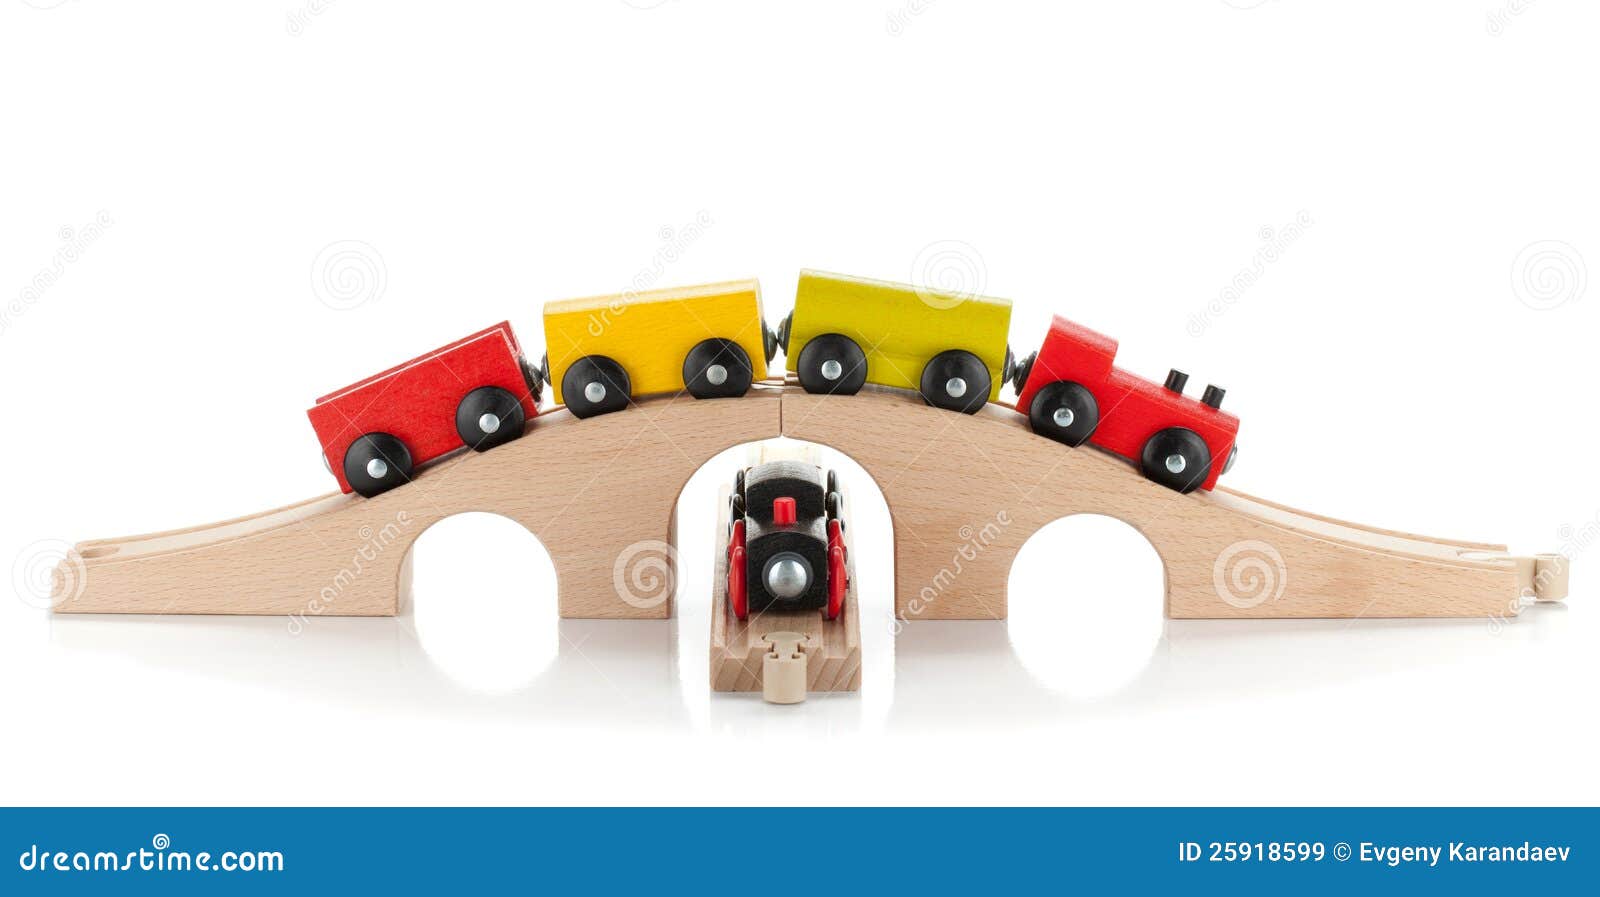 Wooden Toy Trains Royalty Free Stock Images - Image: 25918599